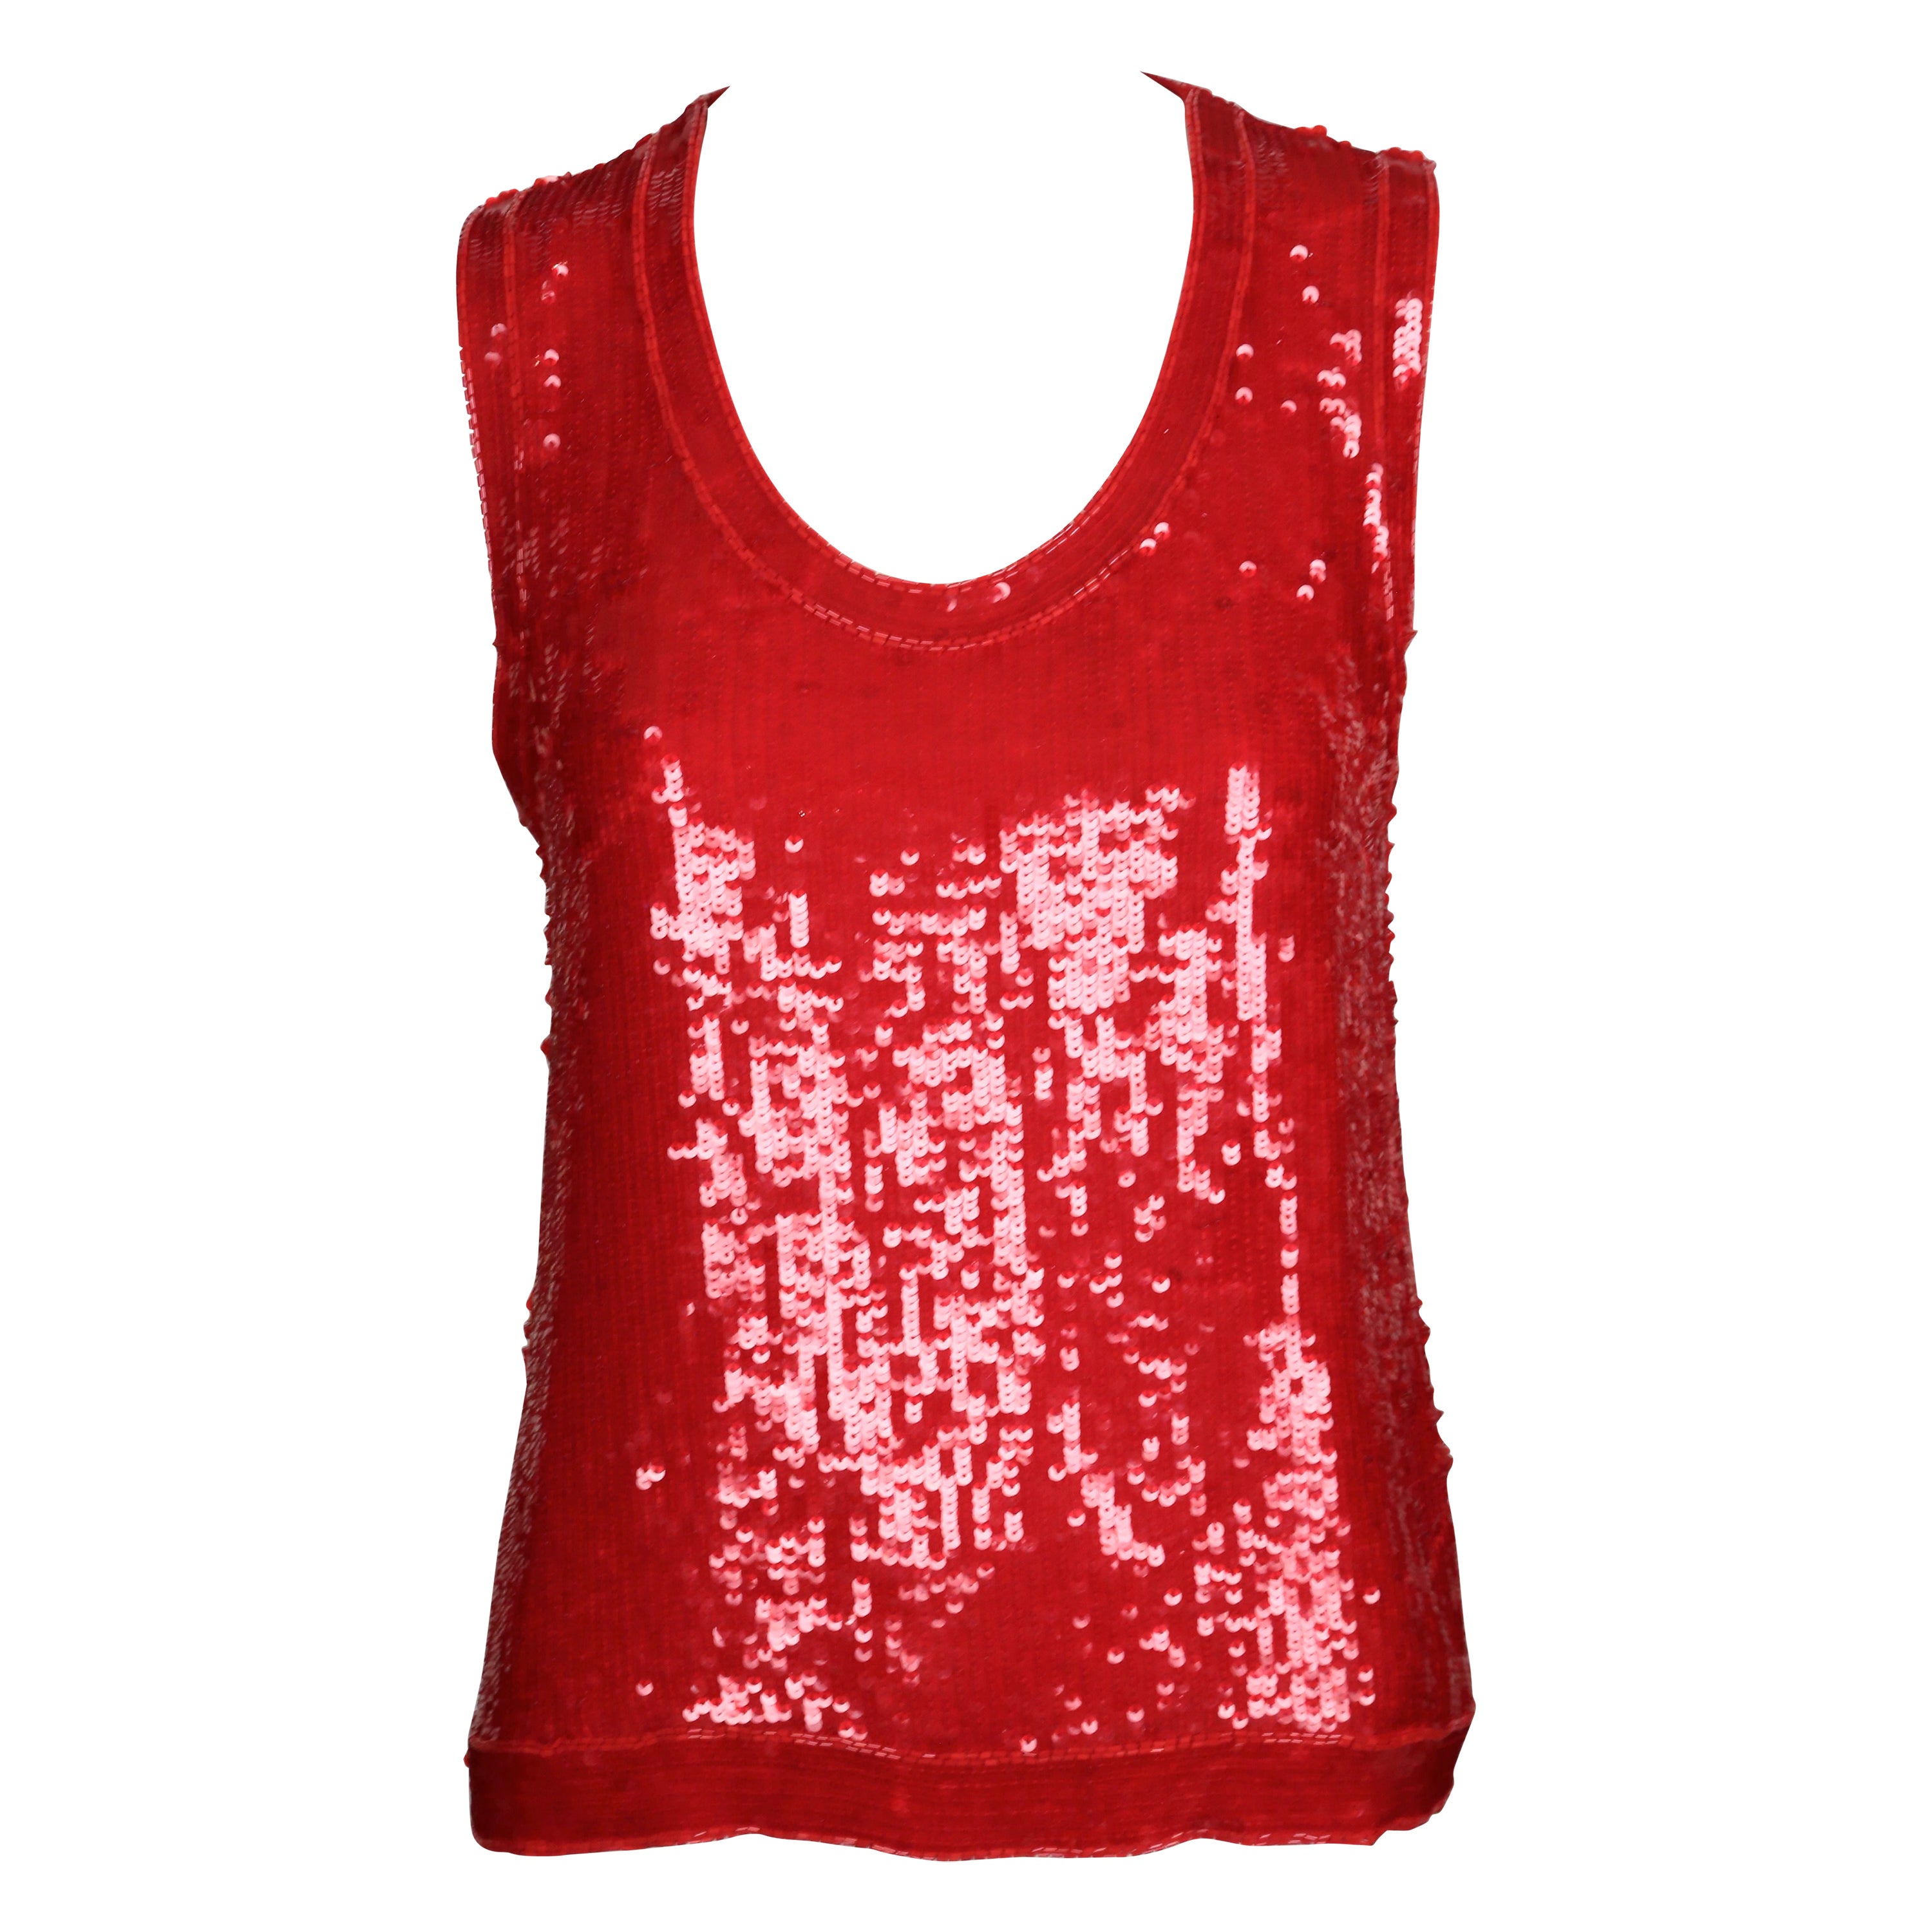 1970's YVES SAINT LAURENT red sequined top For Sale